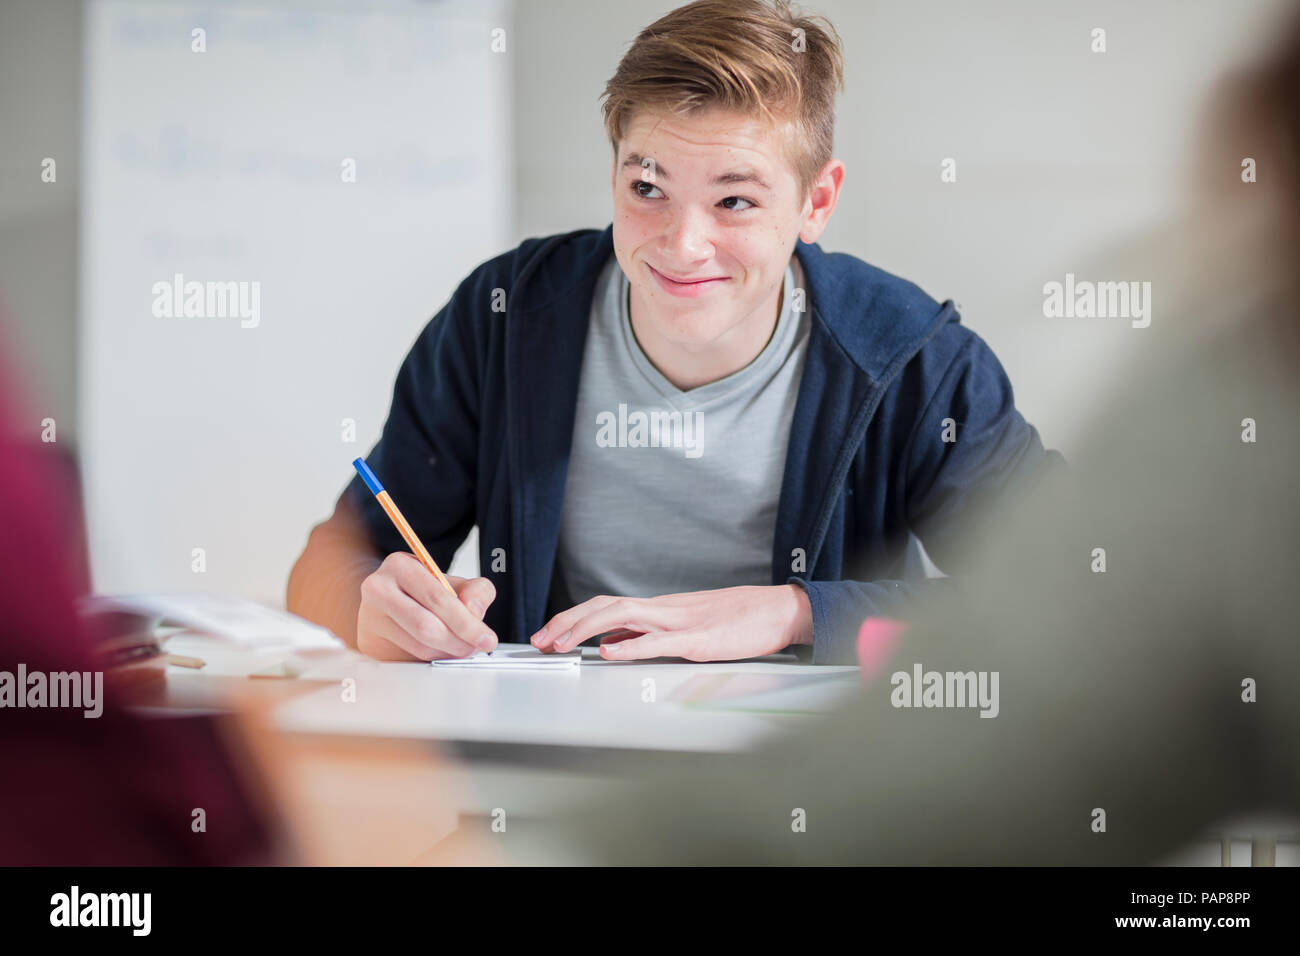 Smiling teenage boy taking notes in class Stock Photo